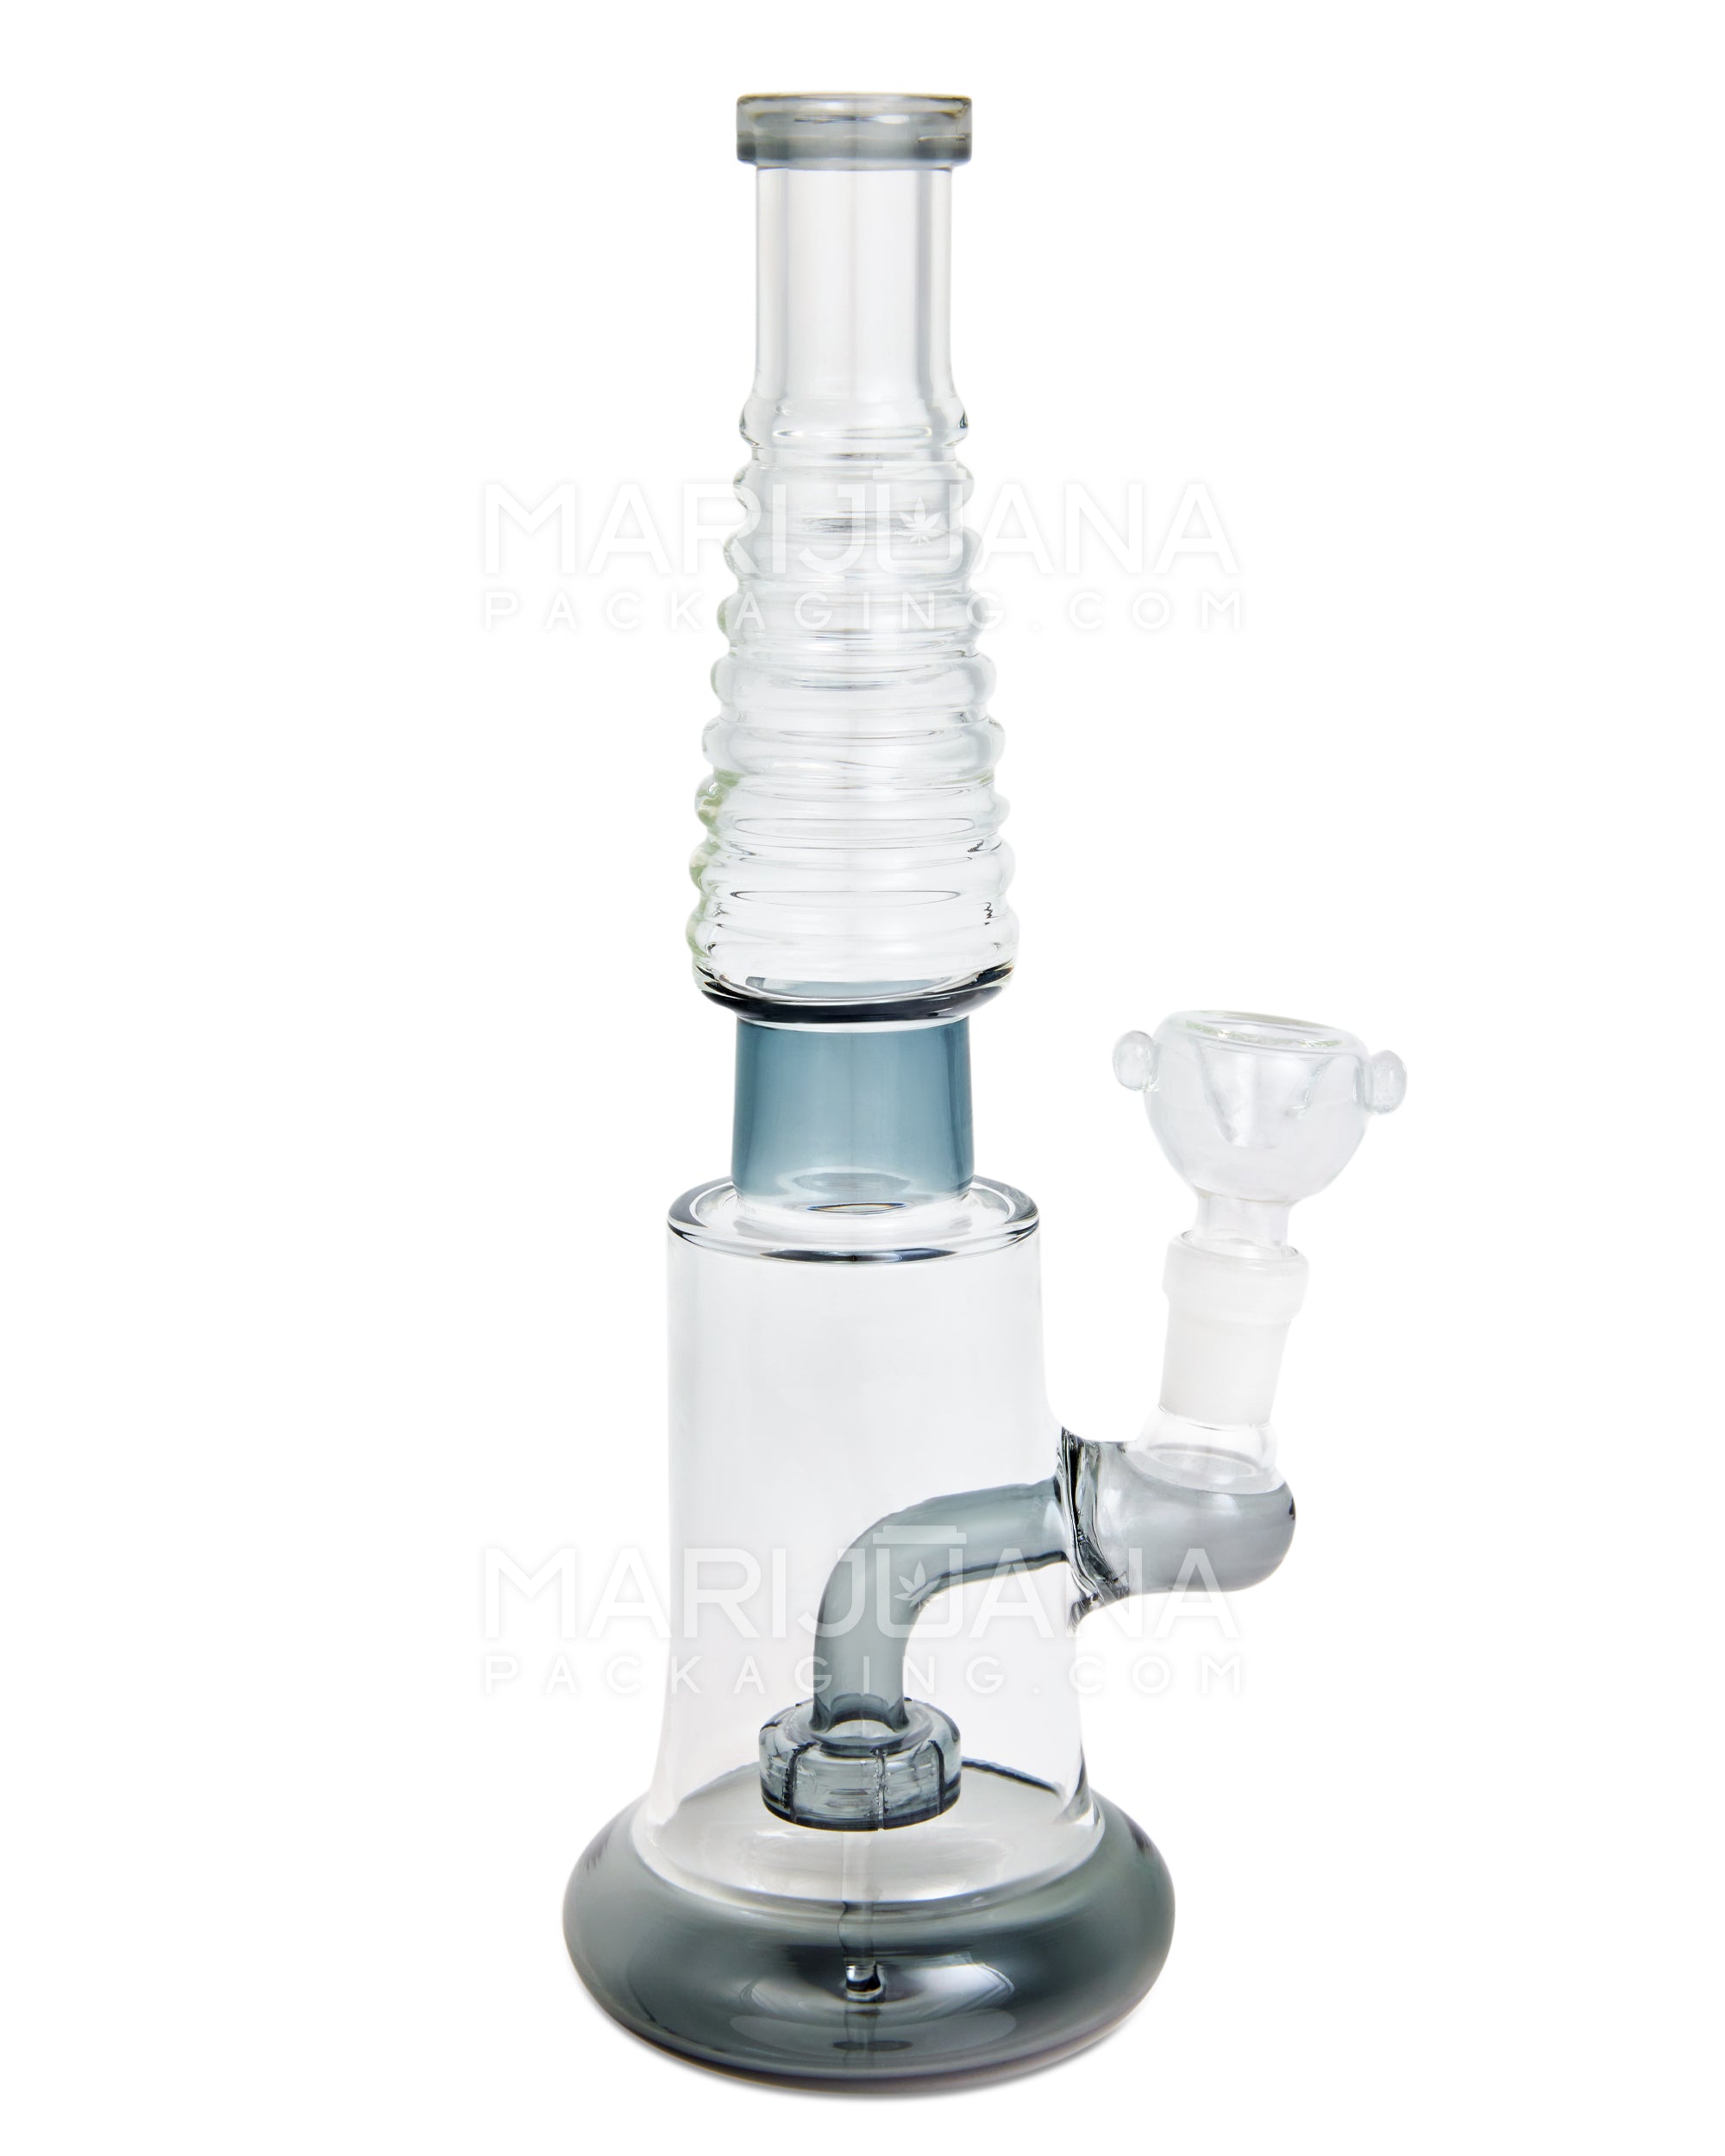 Ribbed Neck Showerhead Perc Glass Water Pipe w/ Donut Base | 10in Tall - 14mm Bowl - Smoke - 1